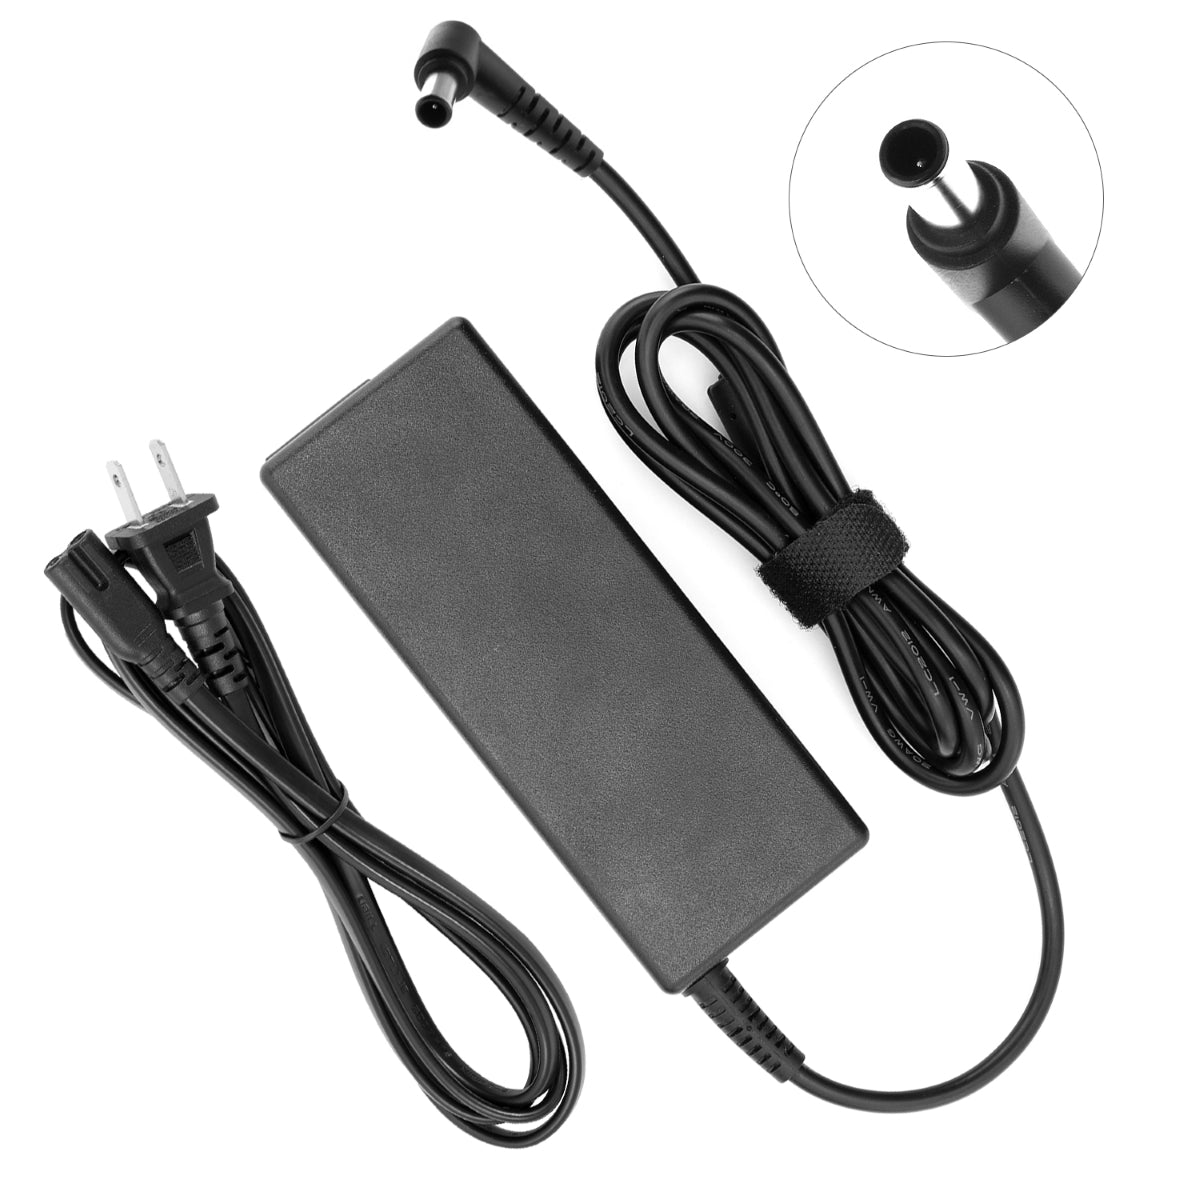 Compatible Charger for Sony Vaio PCG-71811M